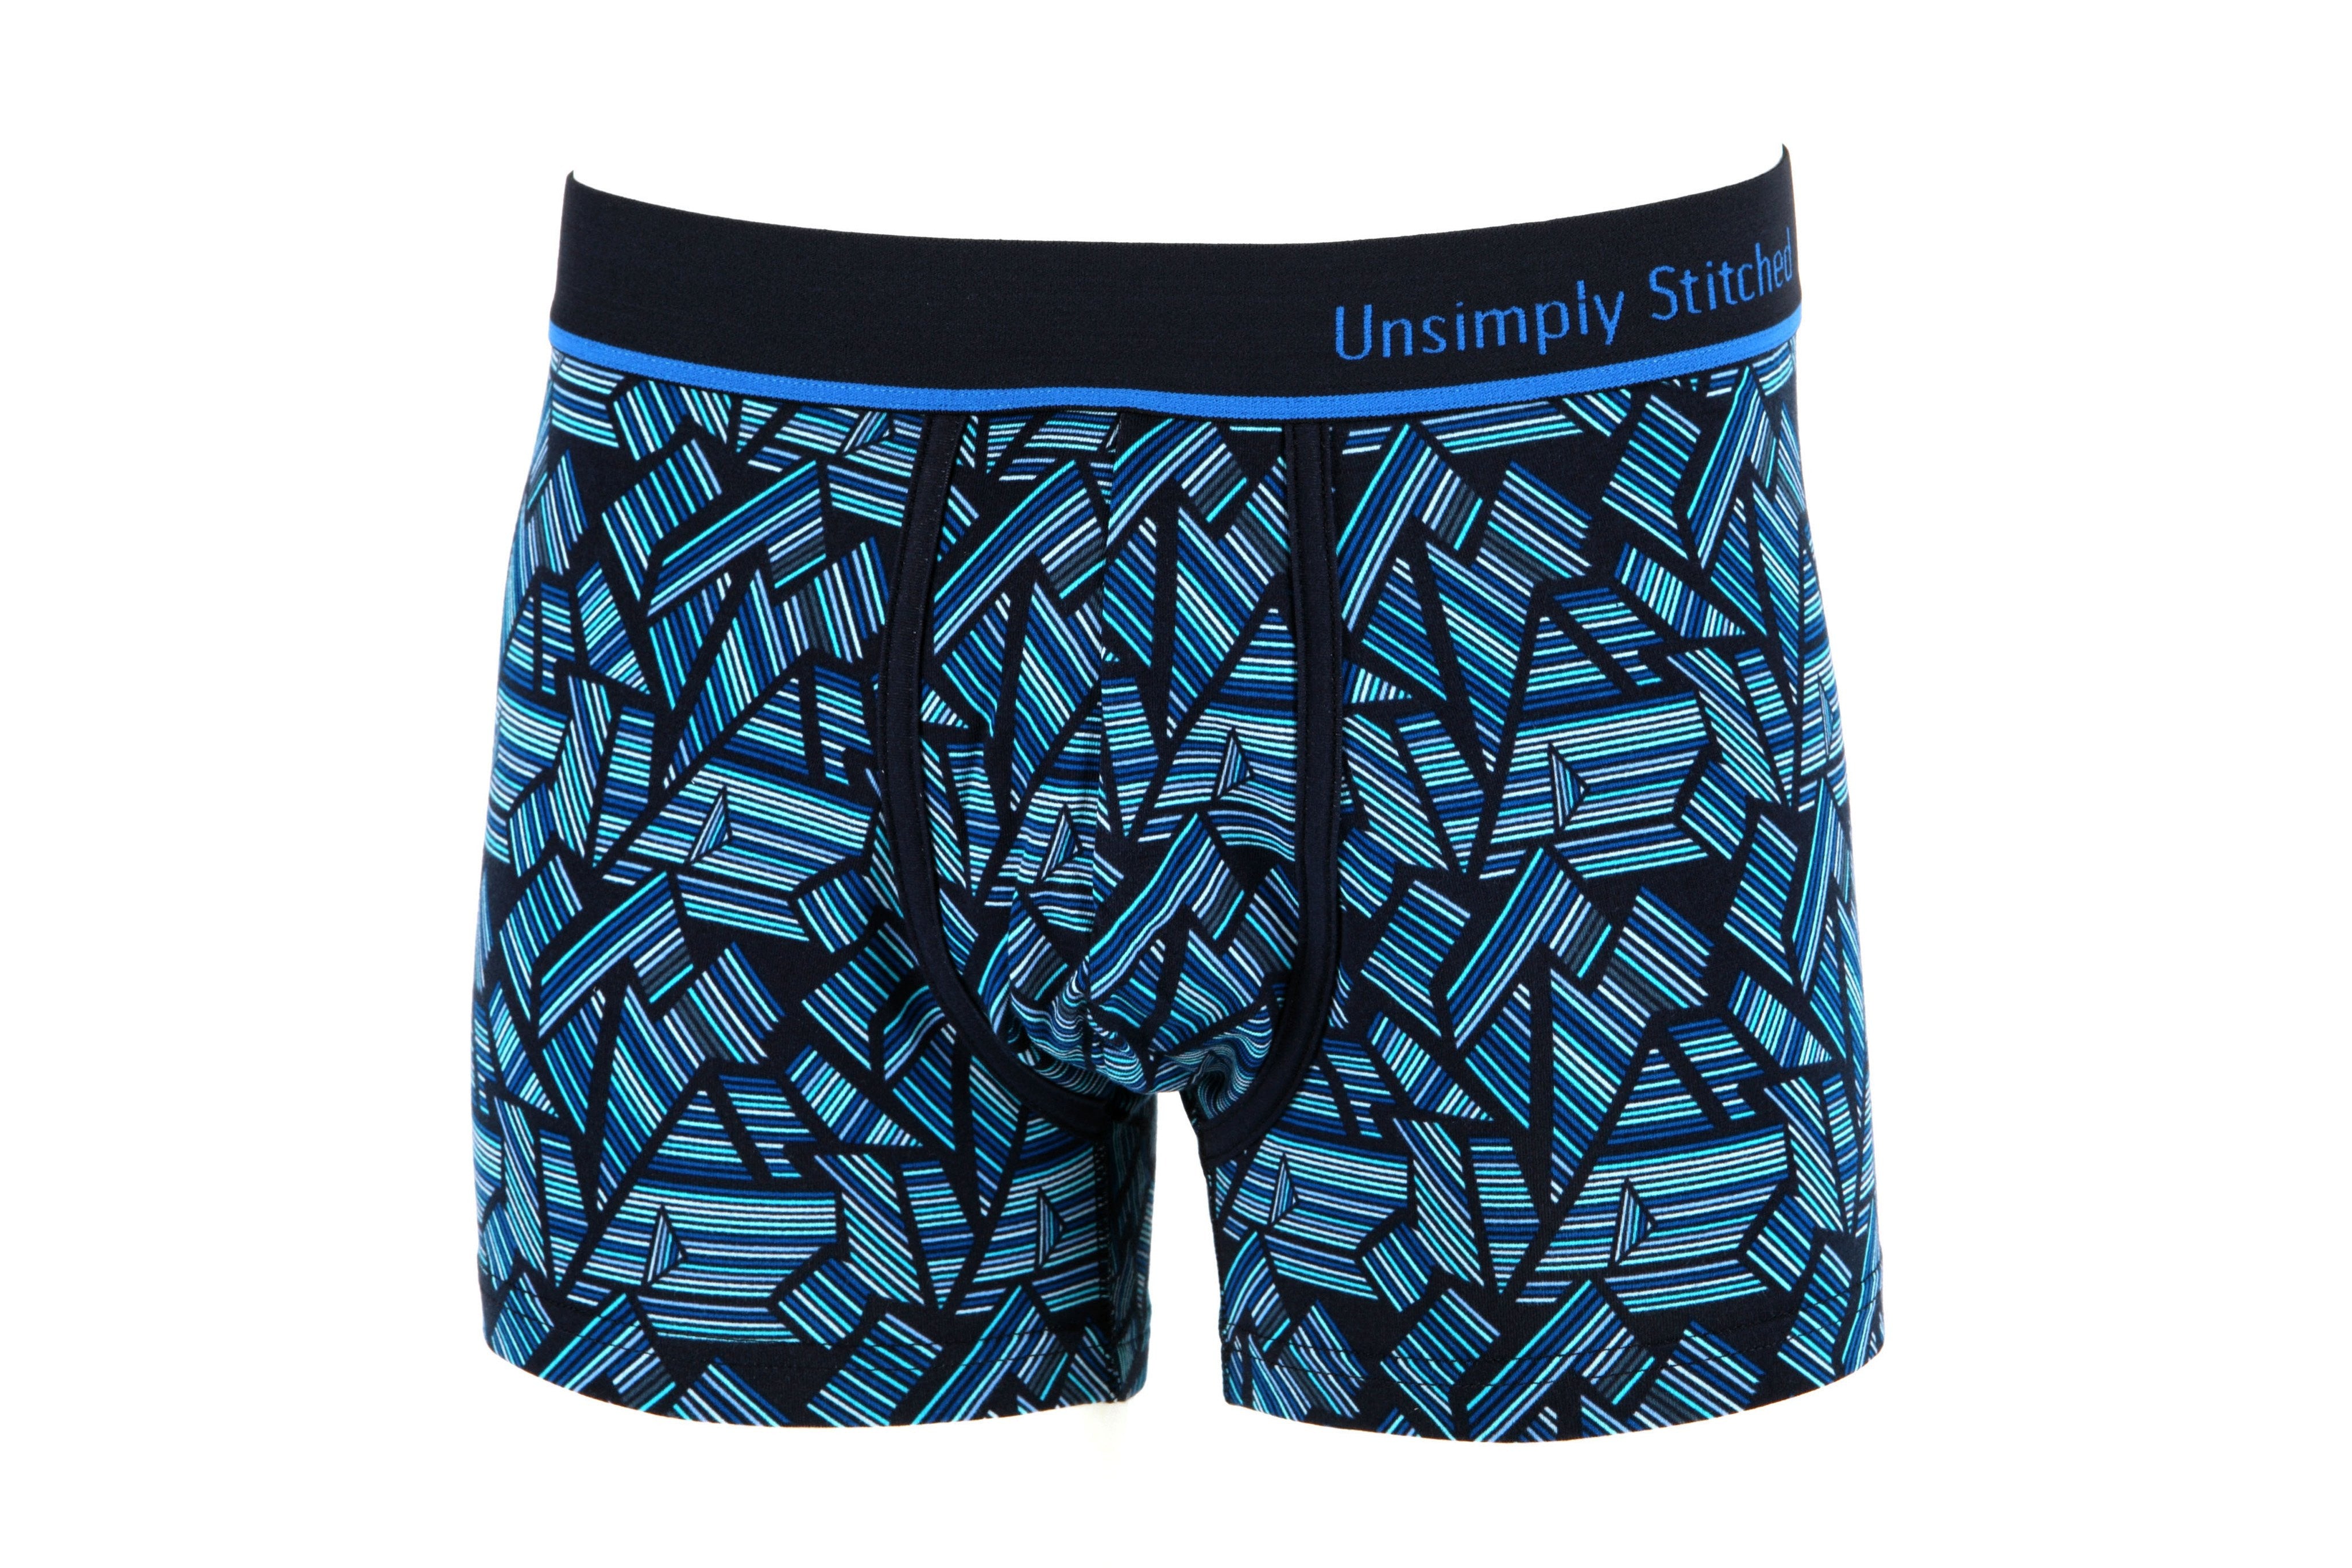 Boxer Trunks – Unsimply Stitched